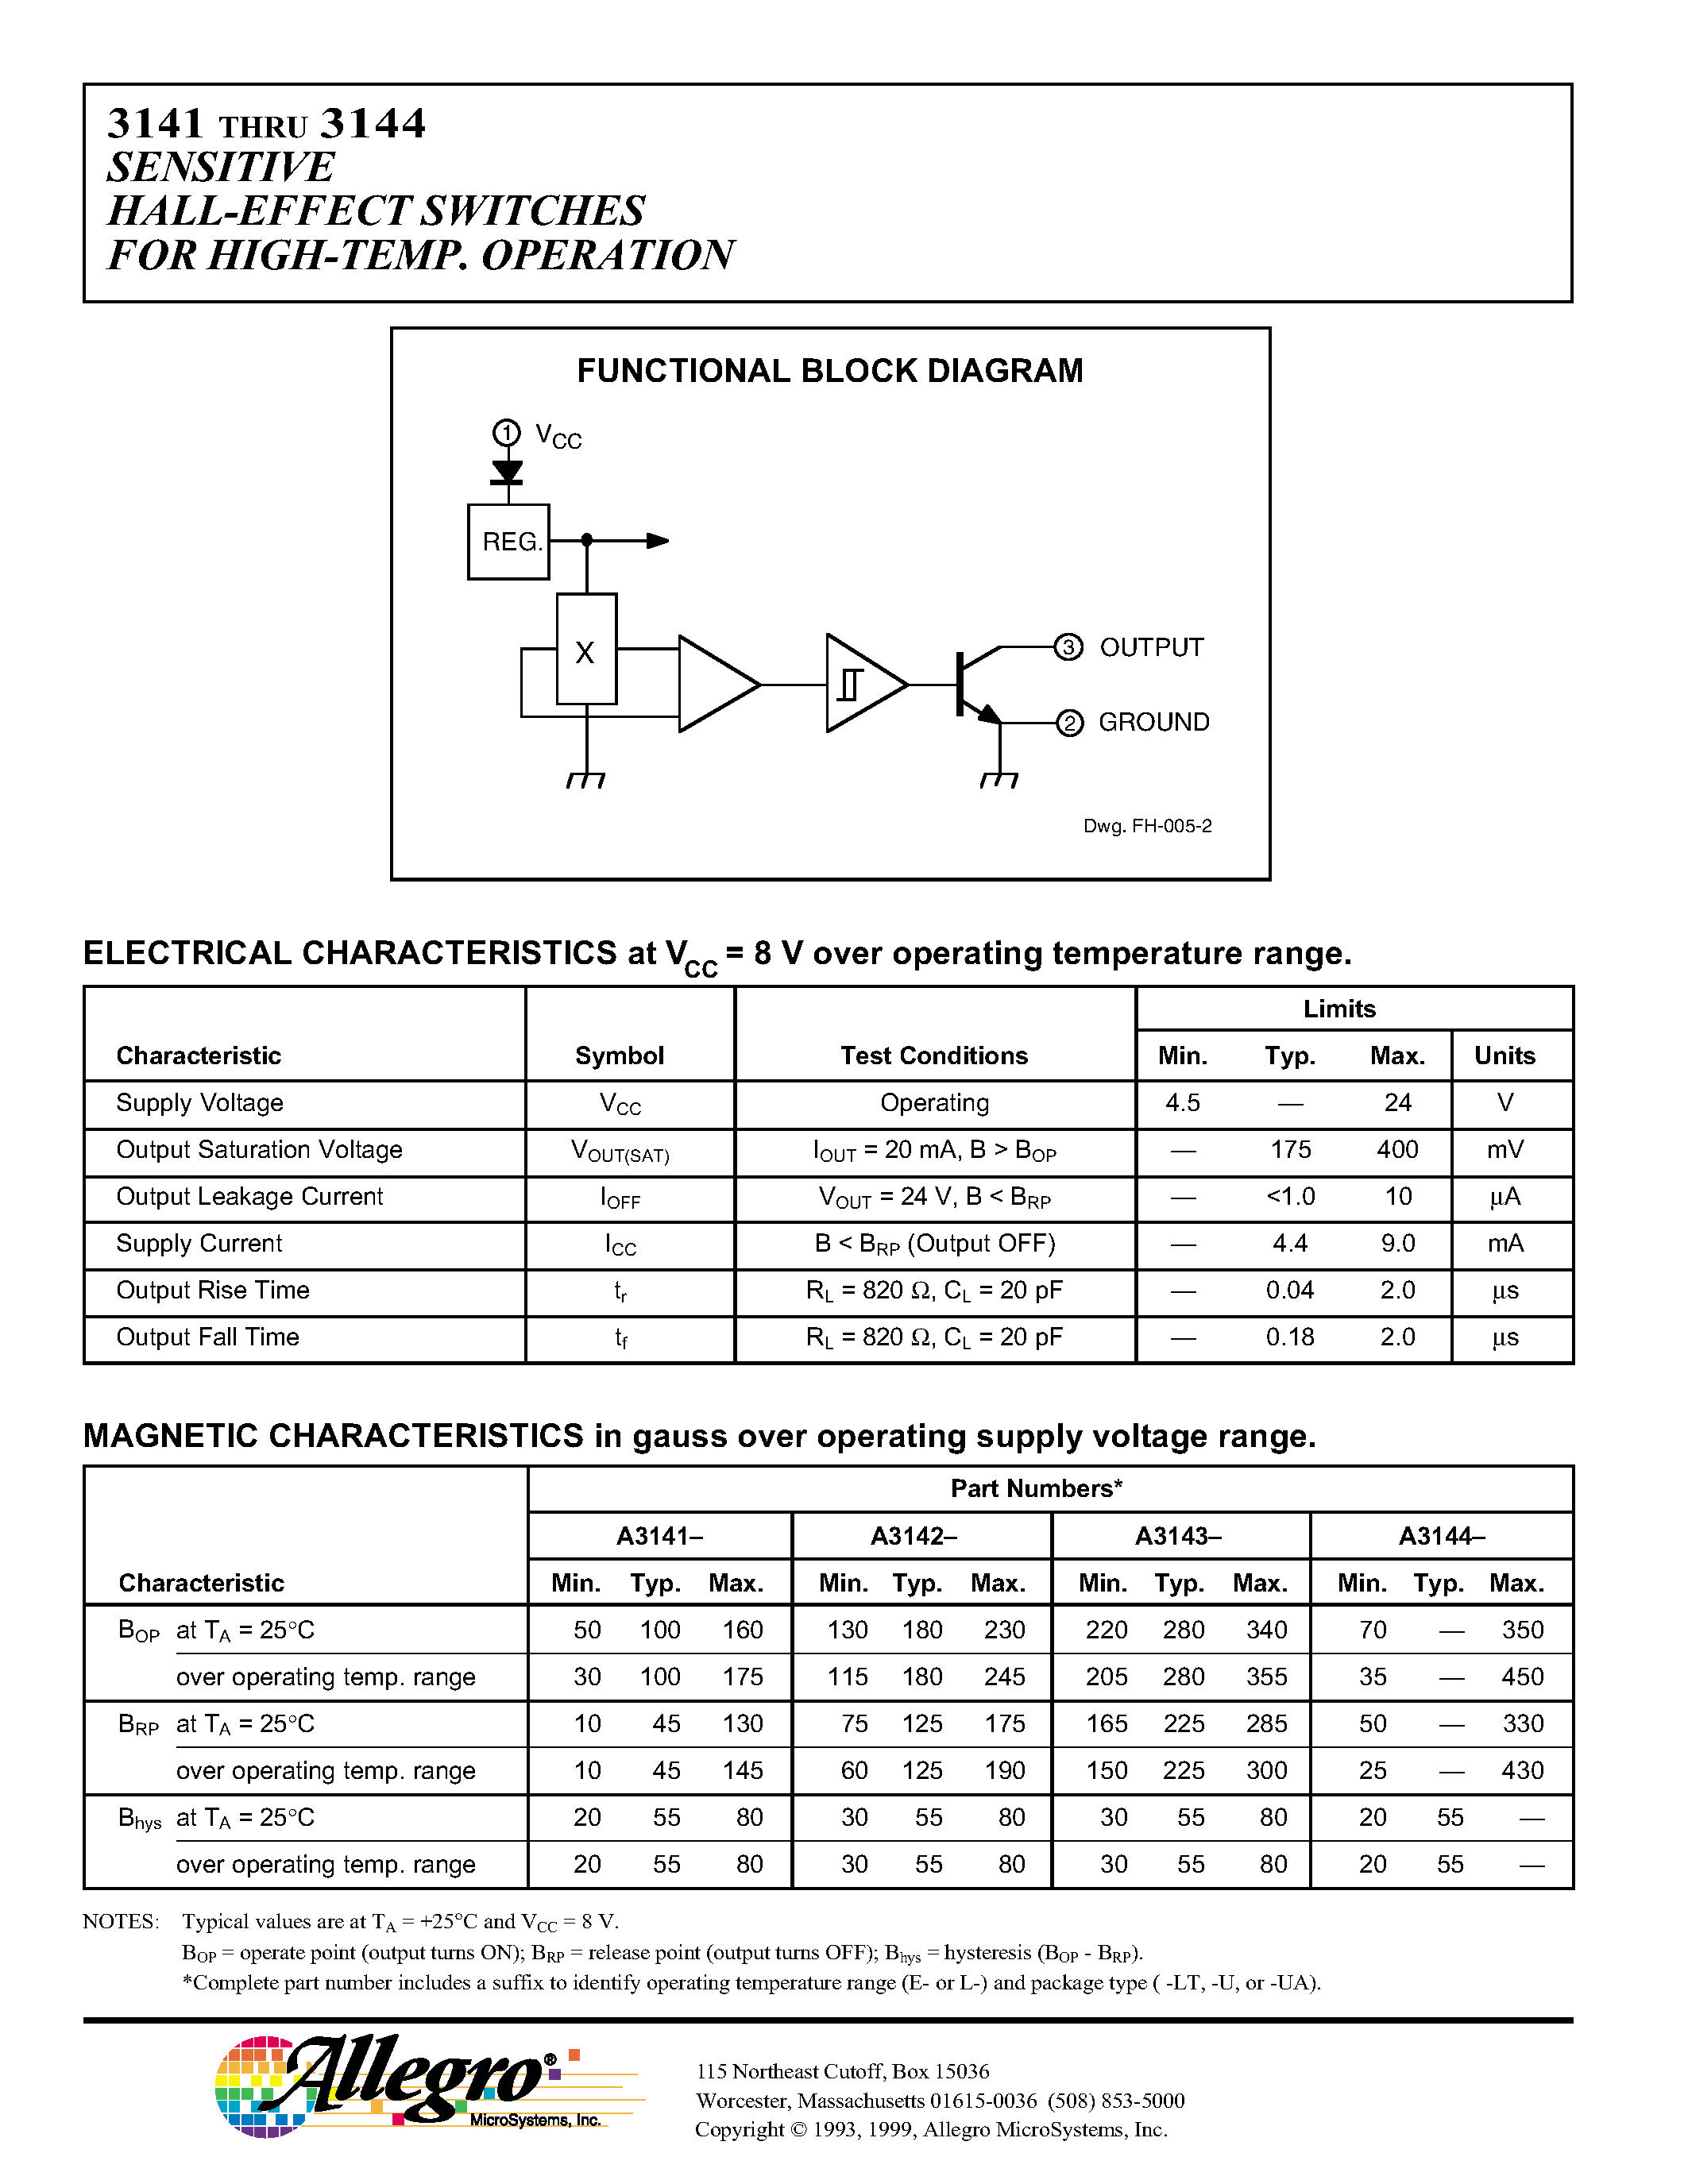 Даташит A3142-U - SENSITIVE HALL-EFFECT SWITCHES FOR HIGH-TEMPERATURE OPERATION страница 2